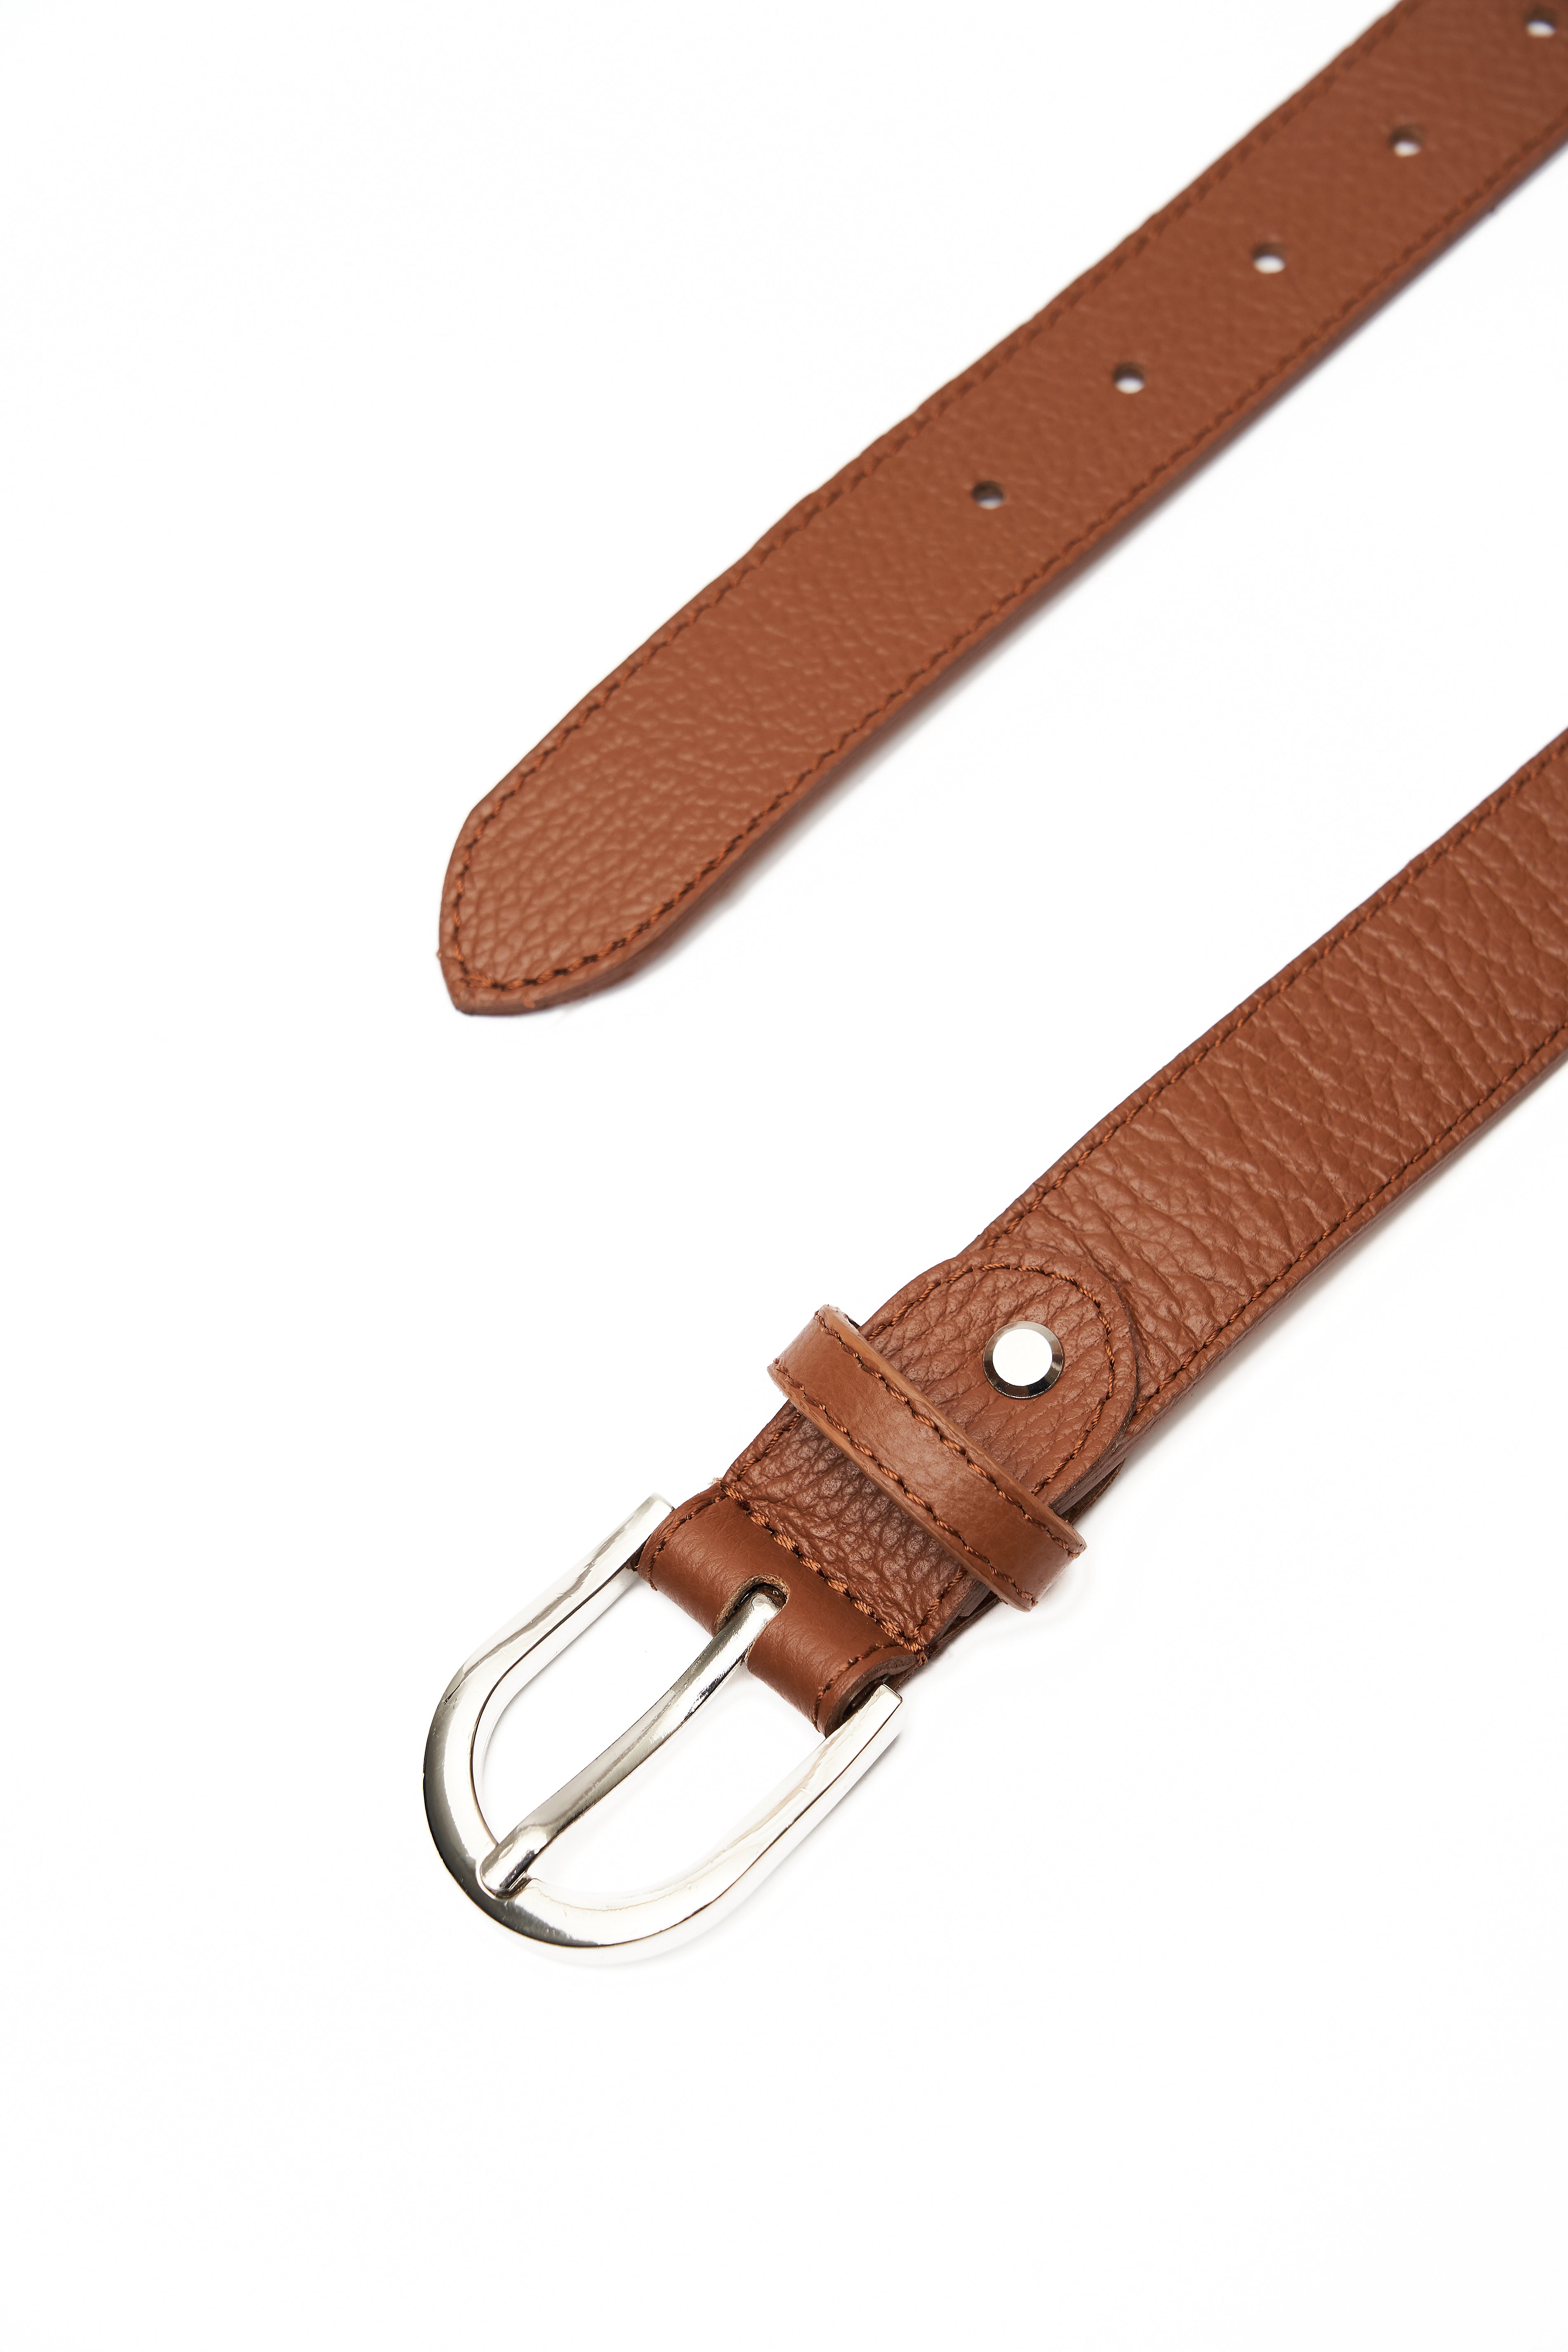 LEATHER BROWN BELT WITH SILVER DETAILS